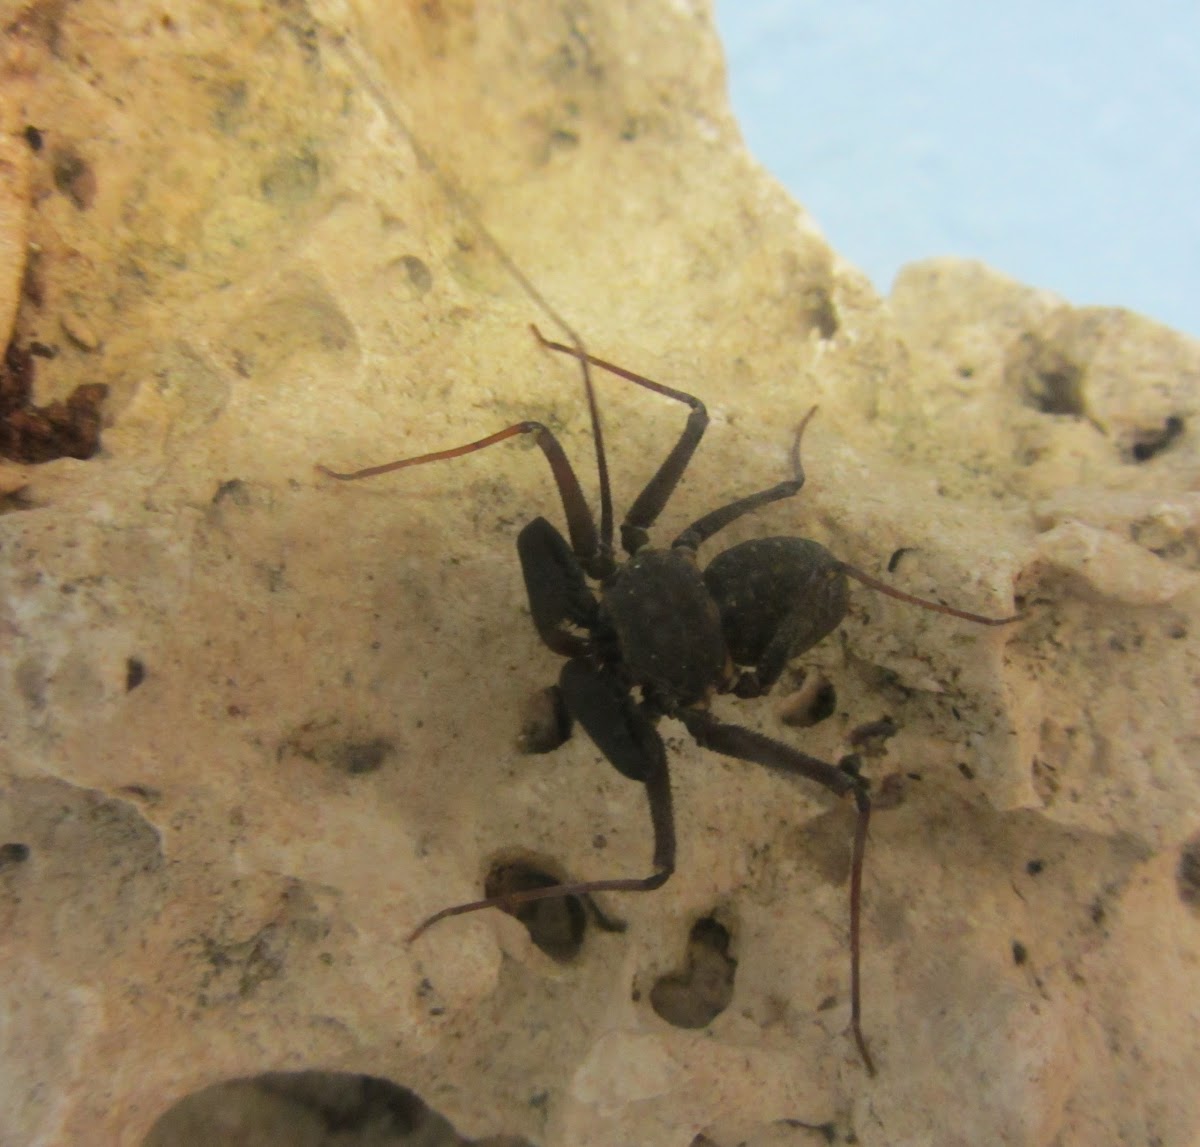 Florida Tailless Whipscorpion